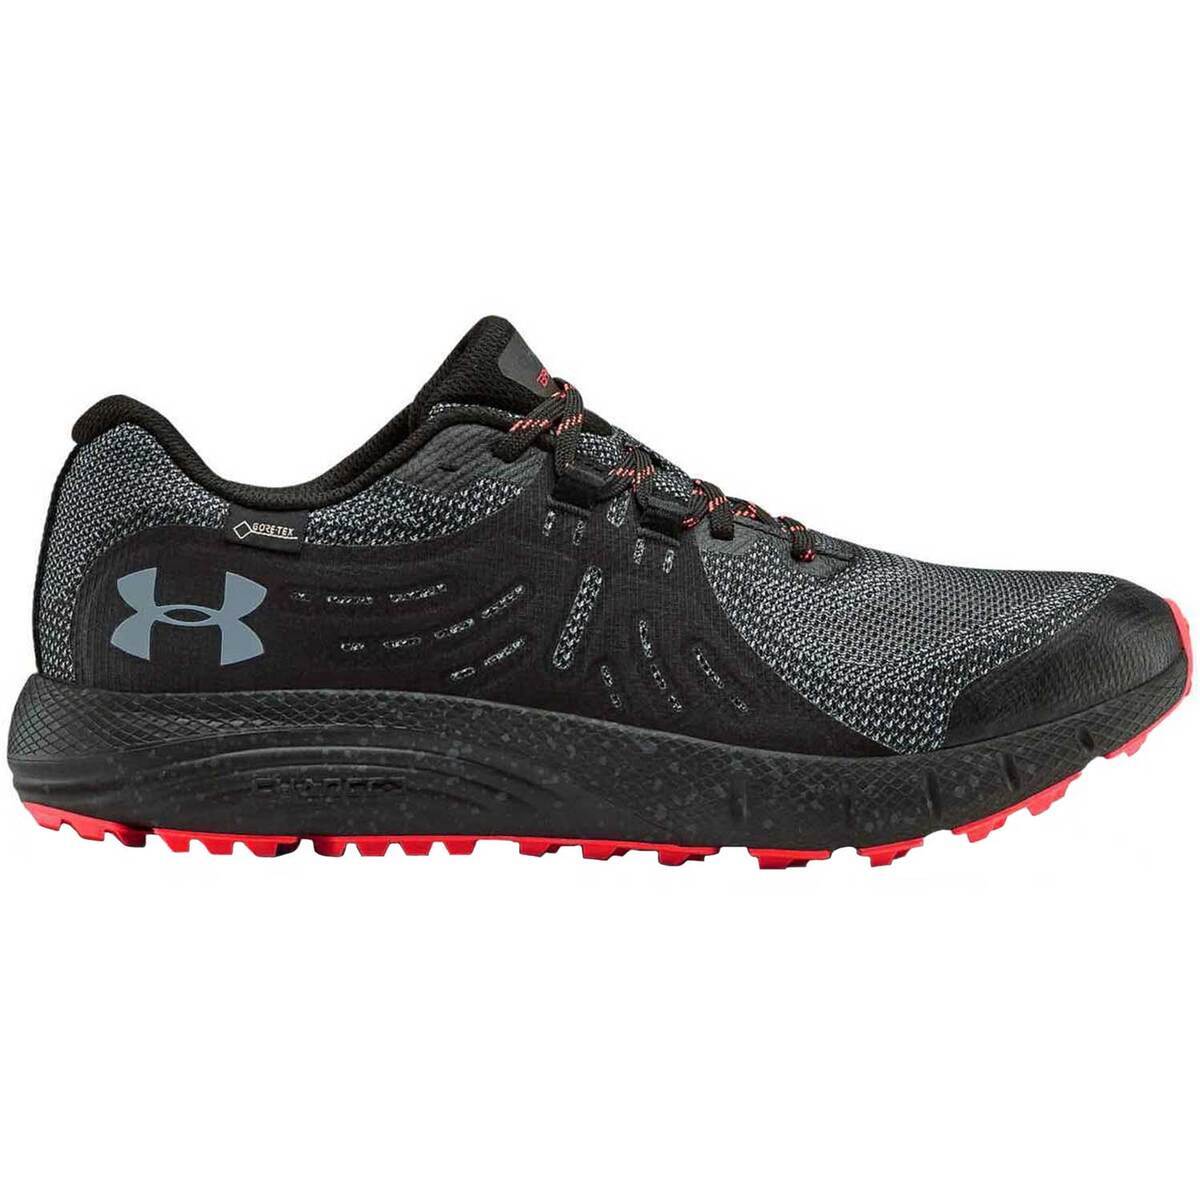 Under Armour Men's Charged Bandit Waterproof Trail Running Shoes